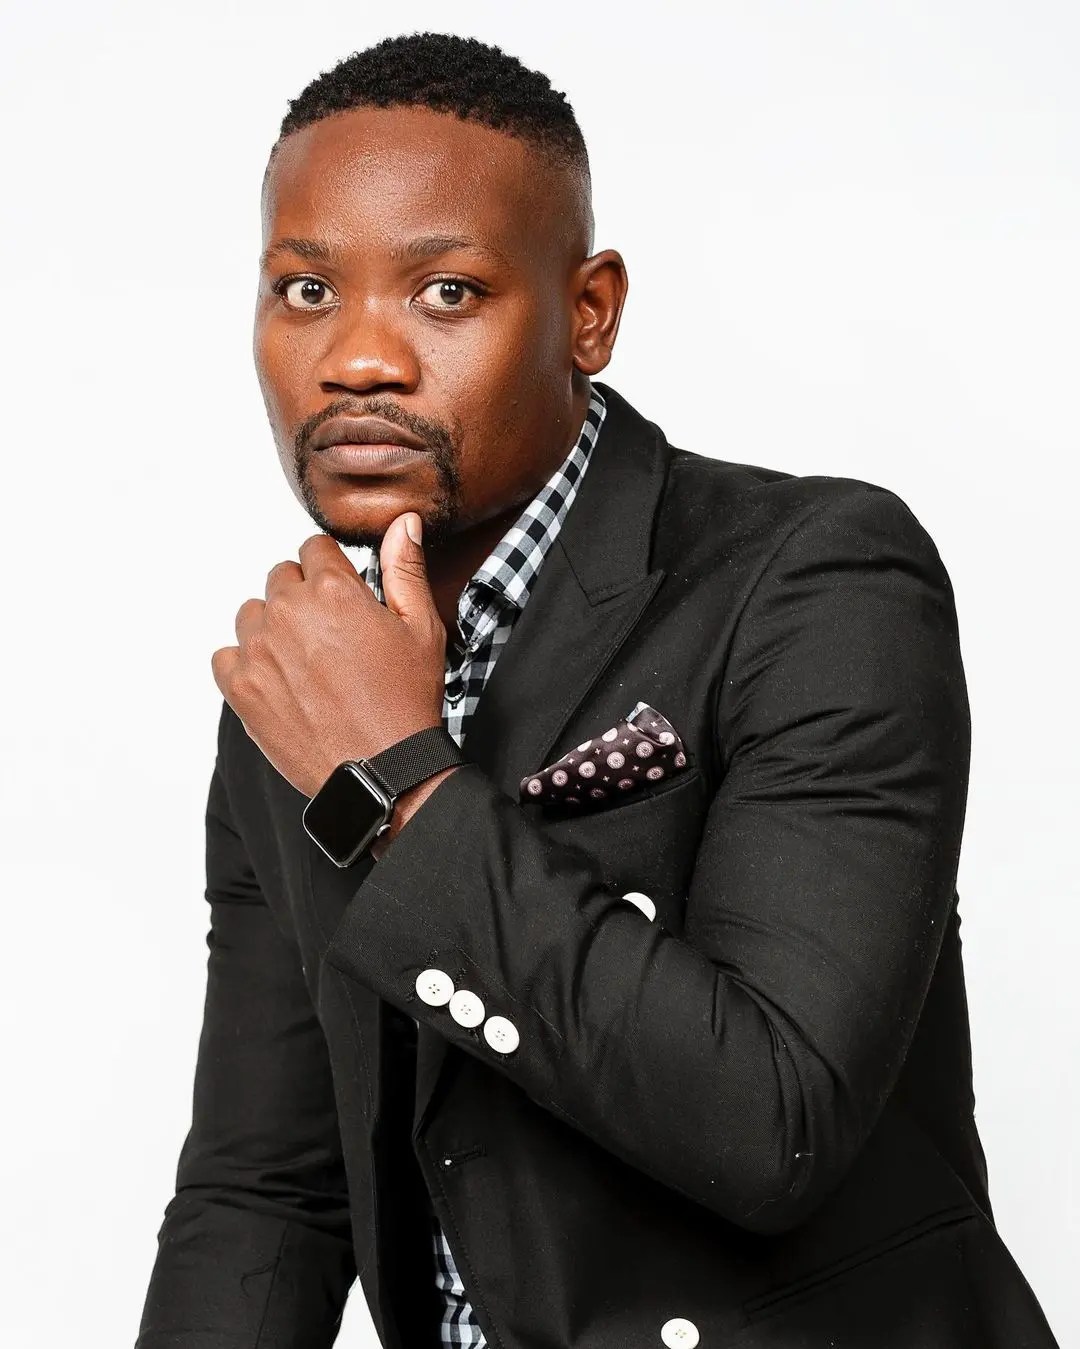 Kwaito (Clement Maosa) from Skeem Saam on how he attempted to commit suicide twice